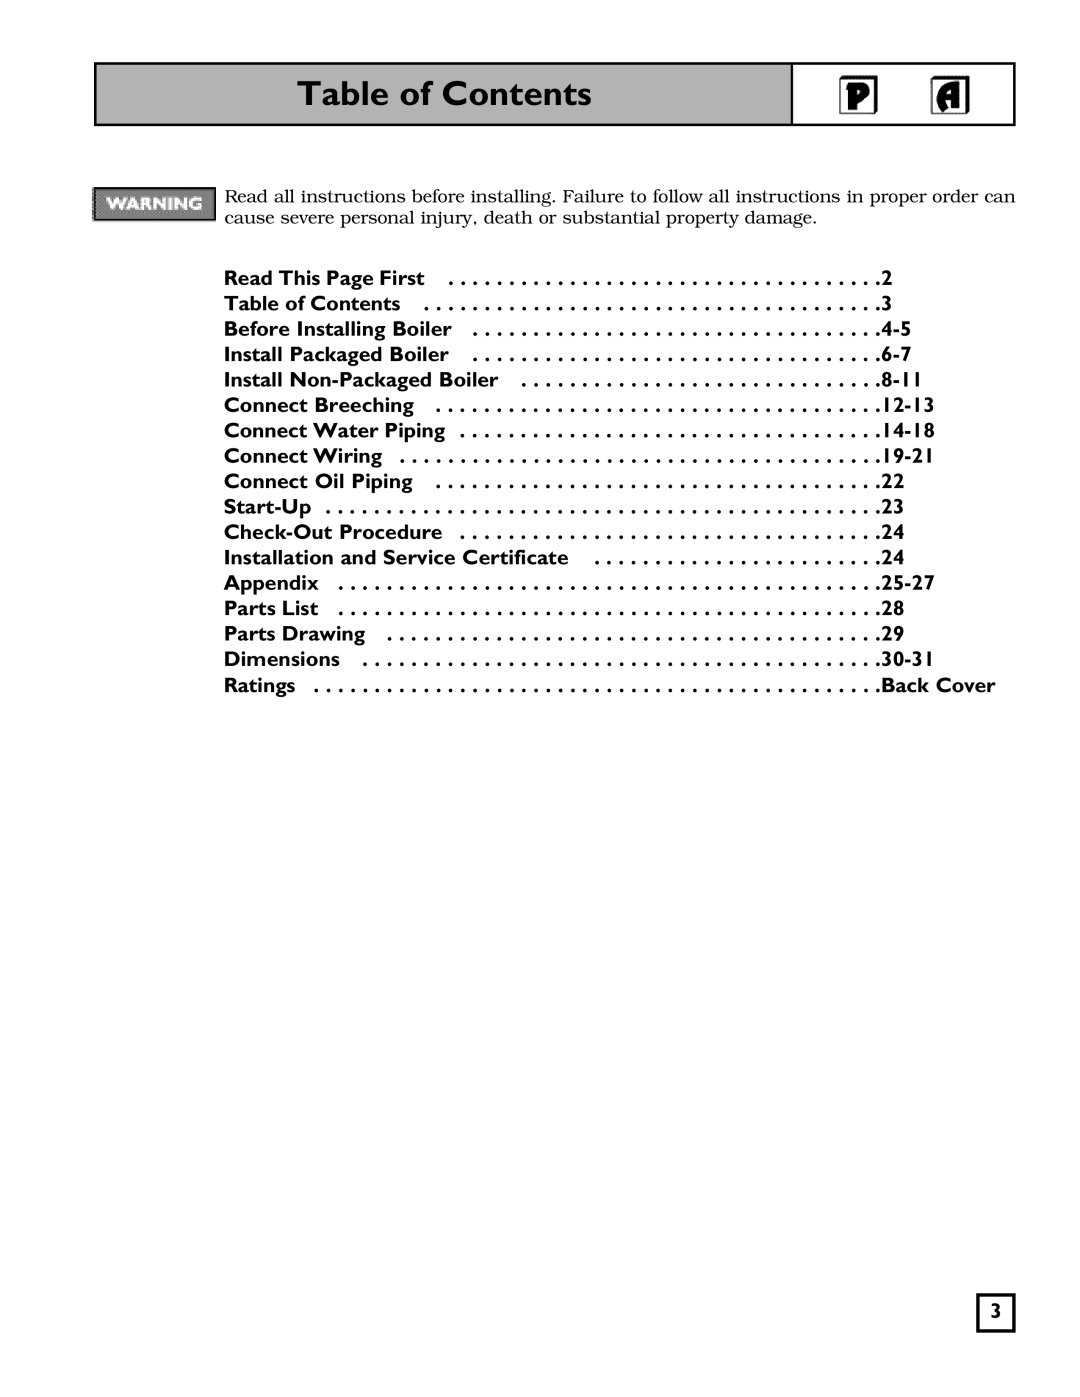 Weil-McLain 550-141-826/1201 Table of Contents, Read This Page First, Before Installing Boiler, Install Packaged Boiler 